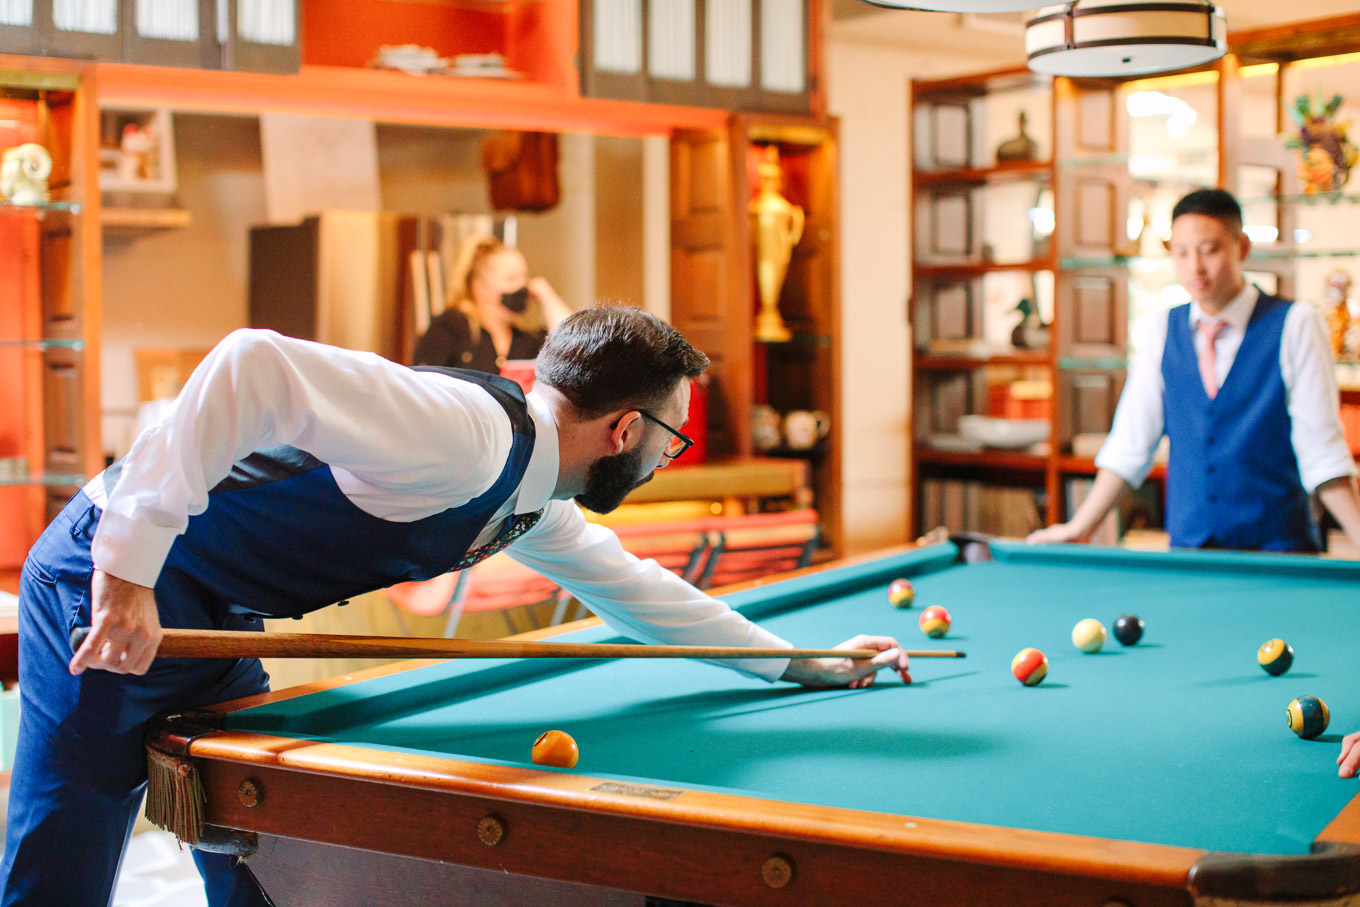 Groom and friends playing pool | Colorful Downtown Los Angeles Valentine Wedding | Los Angeles wedding photographer | #losangeleswedding #colorfulwedding #DTLA #valentinedtla   Source: Mary Costa Photography | Los Angeles